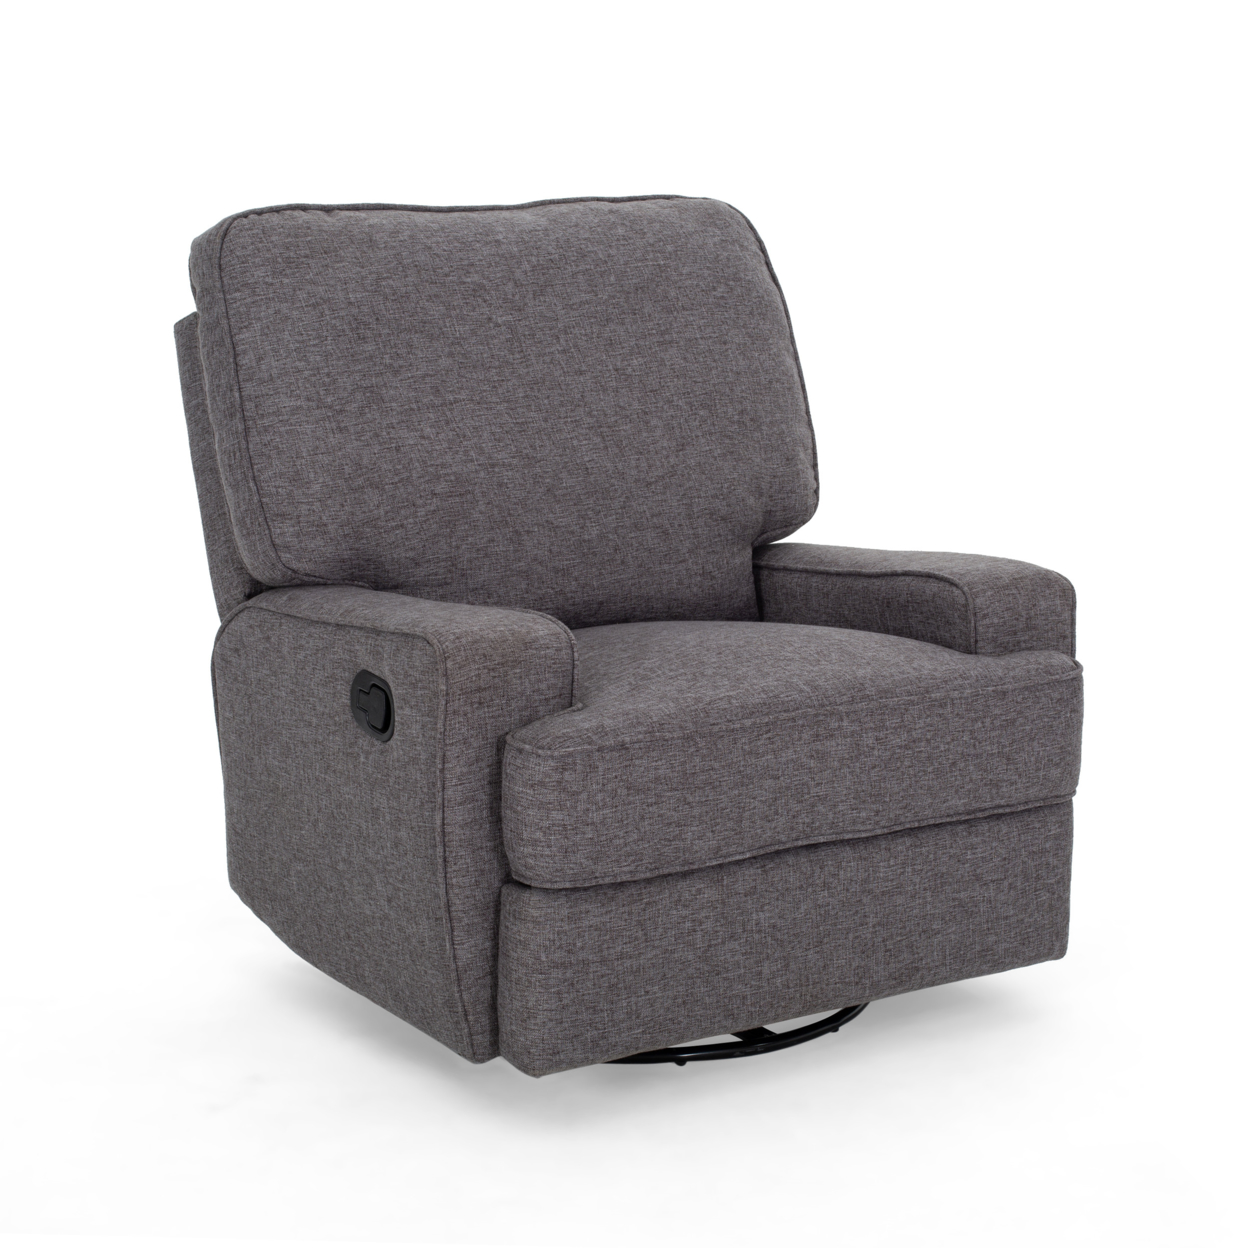 Sibyl Glider Recliner With Swivel, Traditional - Charcoal